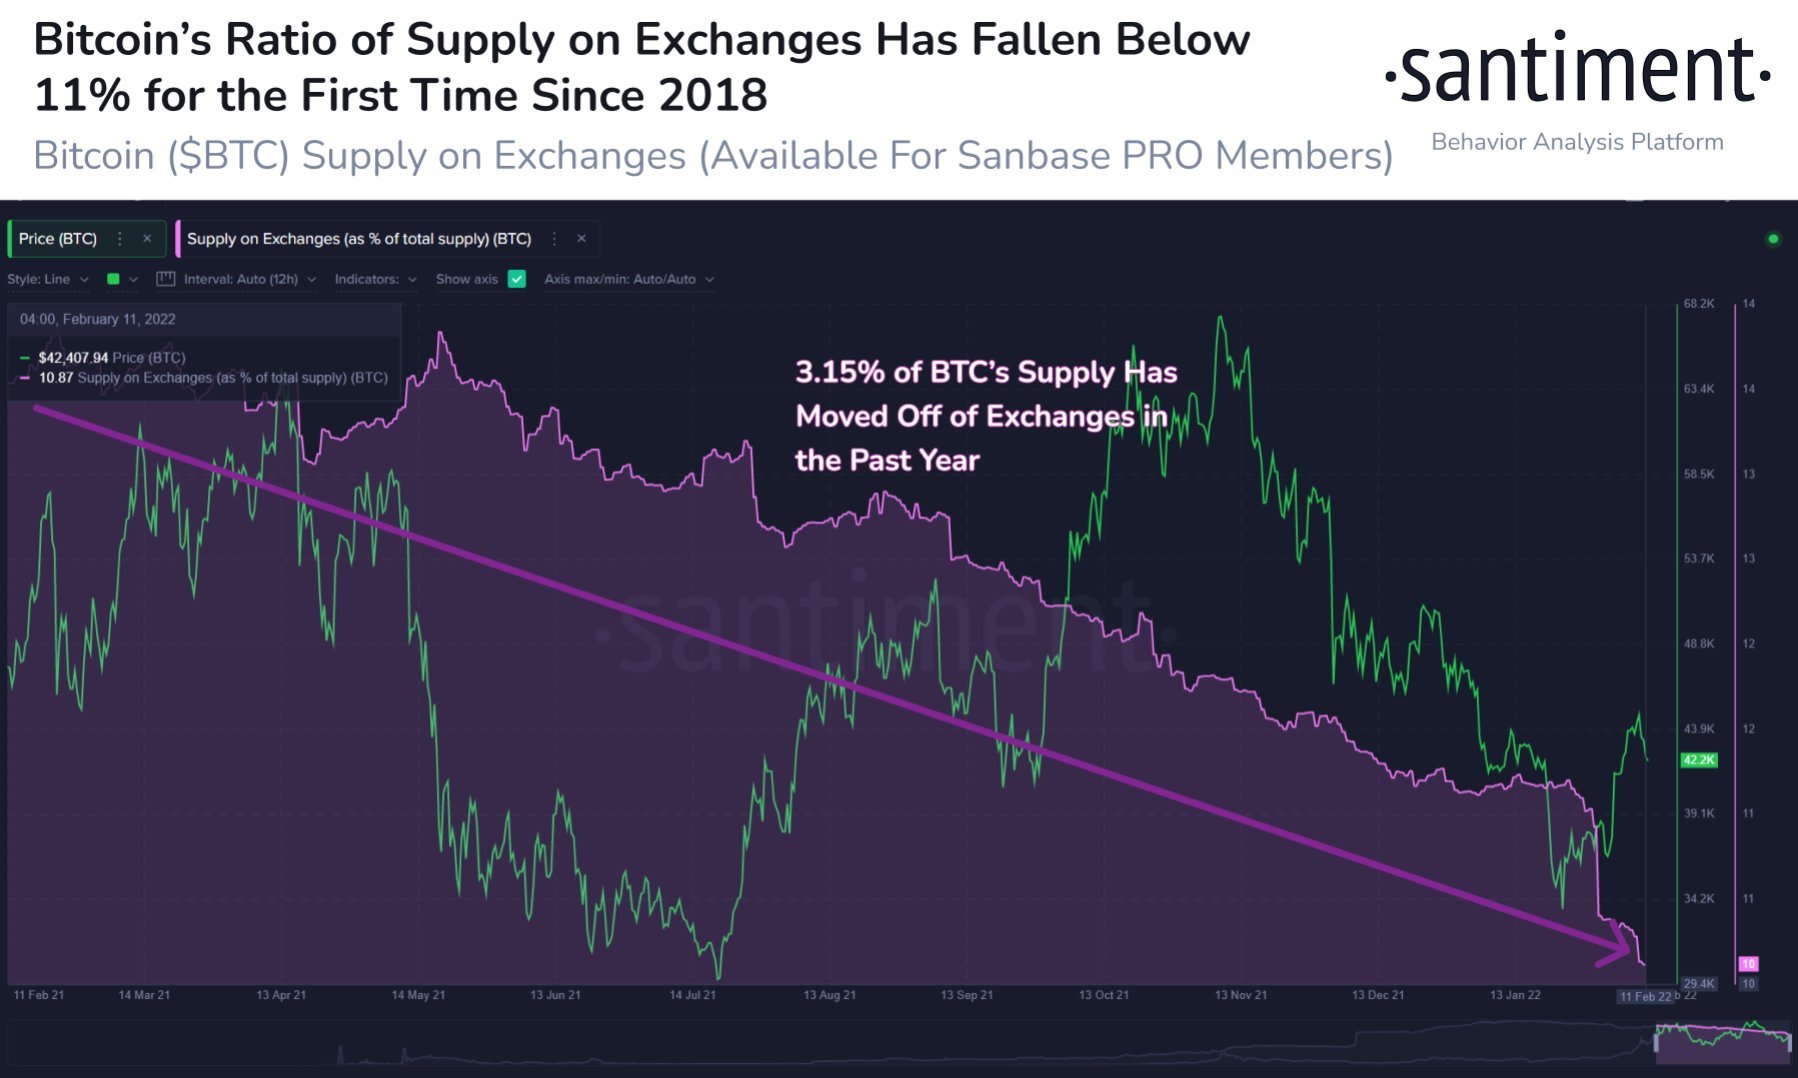 Fears of Russian War and Aggressive FED Sent Stocks and Crypto Tumbling, While Oil and Metals Reign As Safe Havens - BTC exch ratio